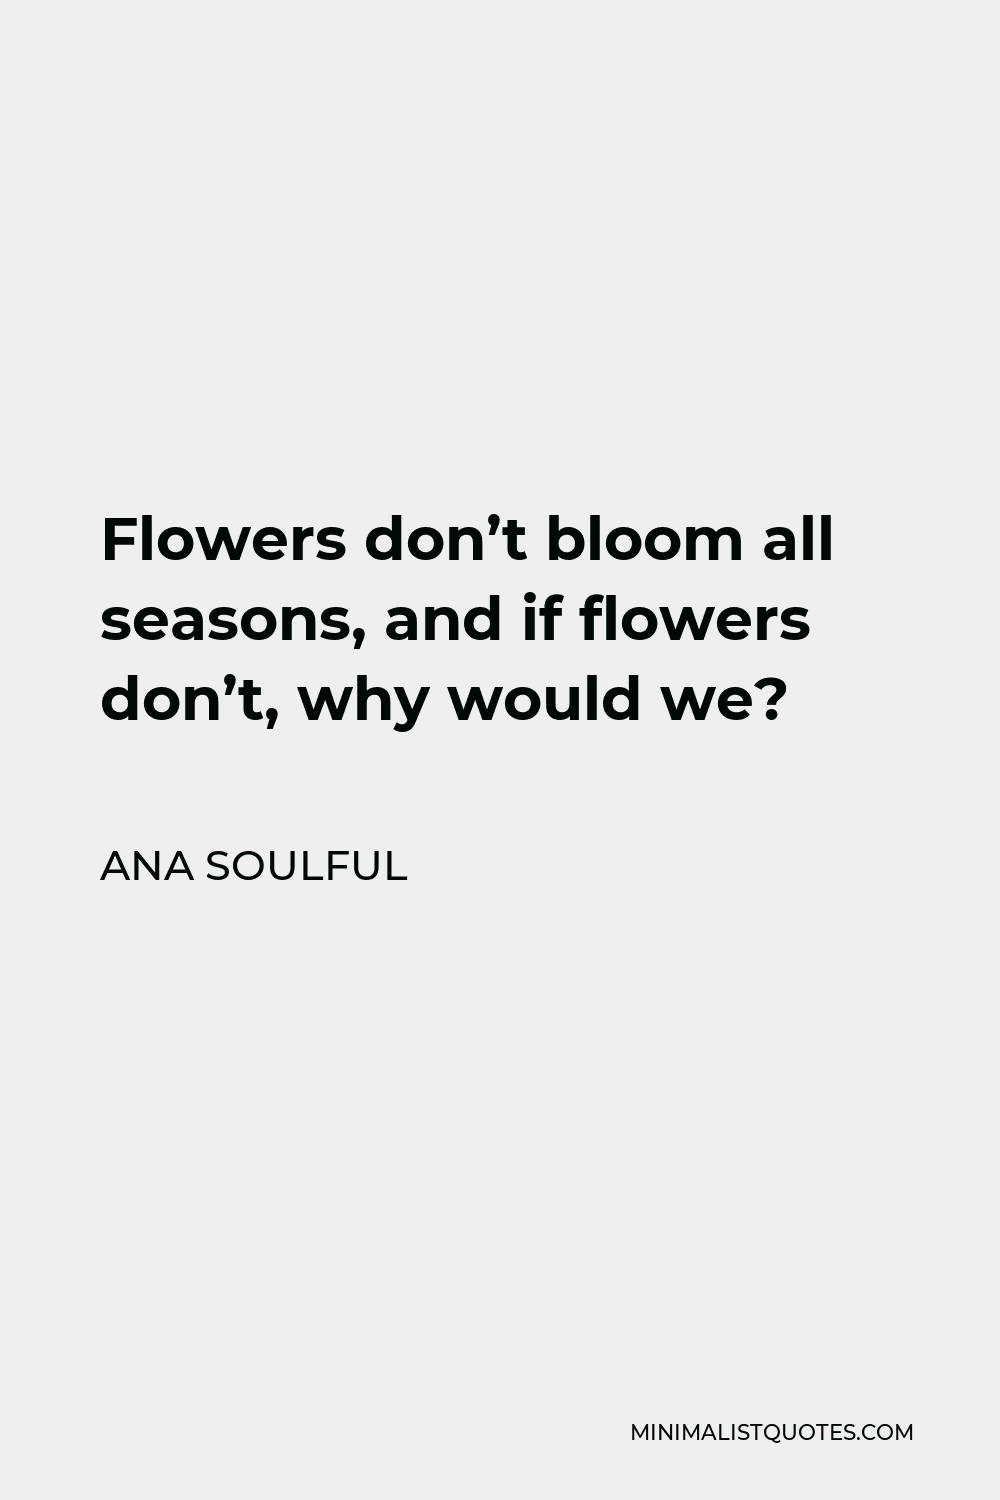 Ana Soulful Quote - Flowers don’t bloom all seasons, and if flowers don’t, why would we?